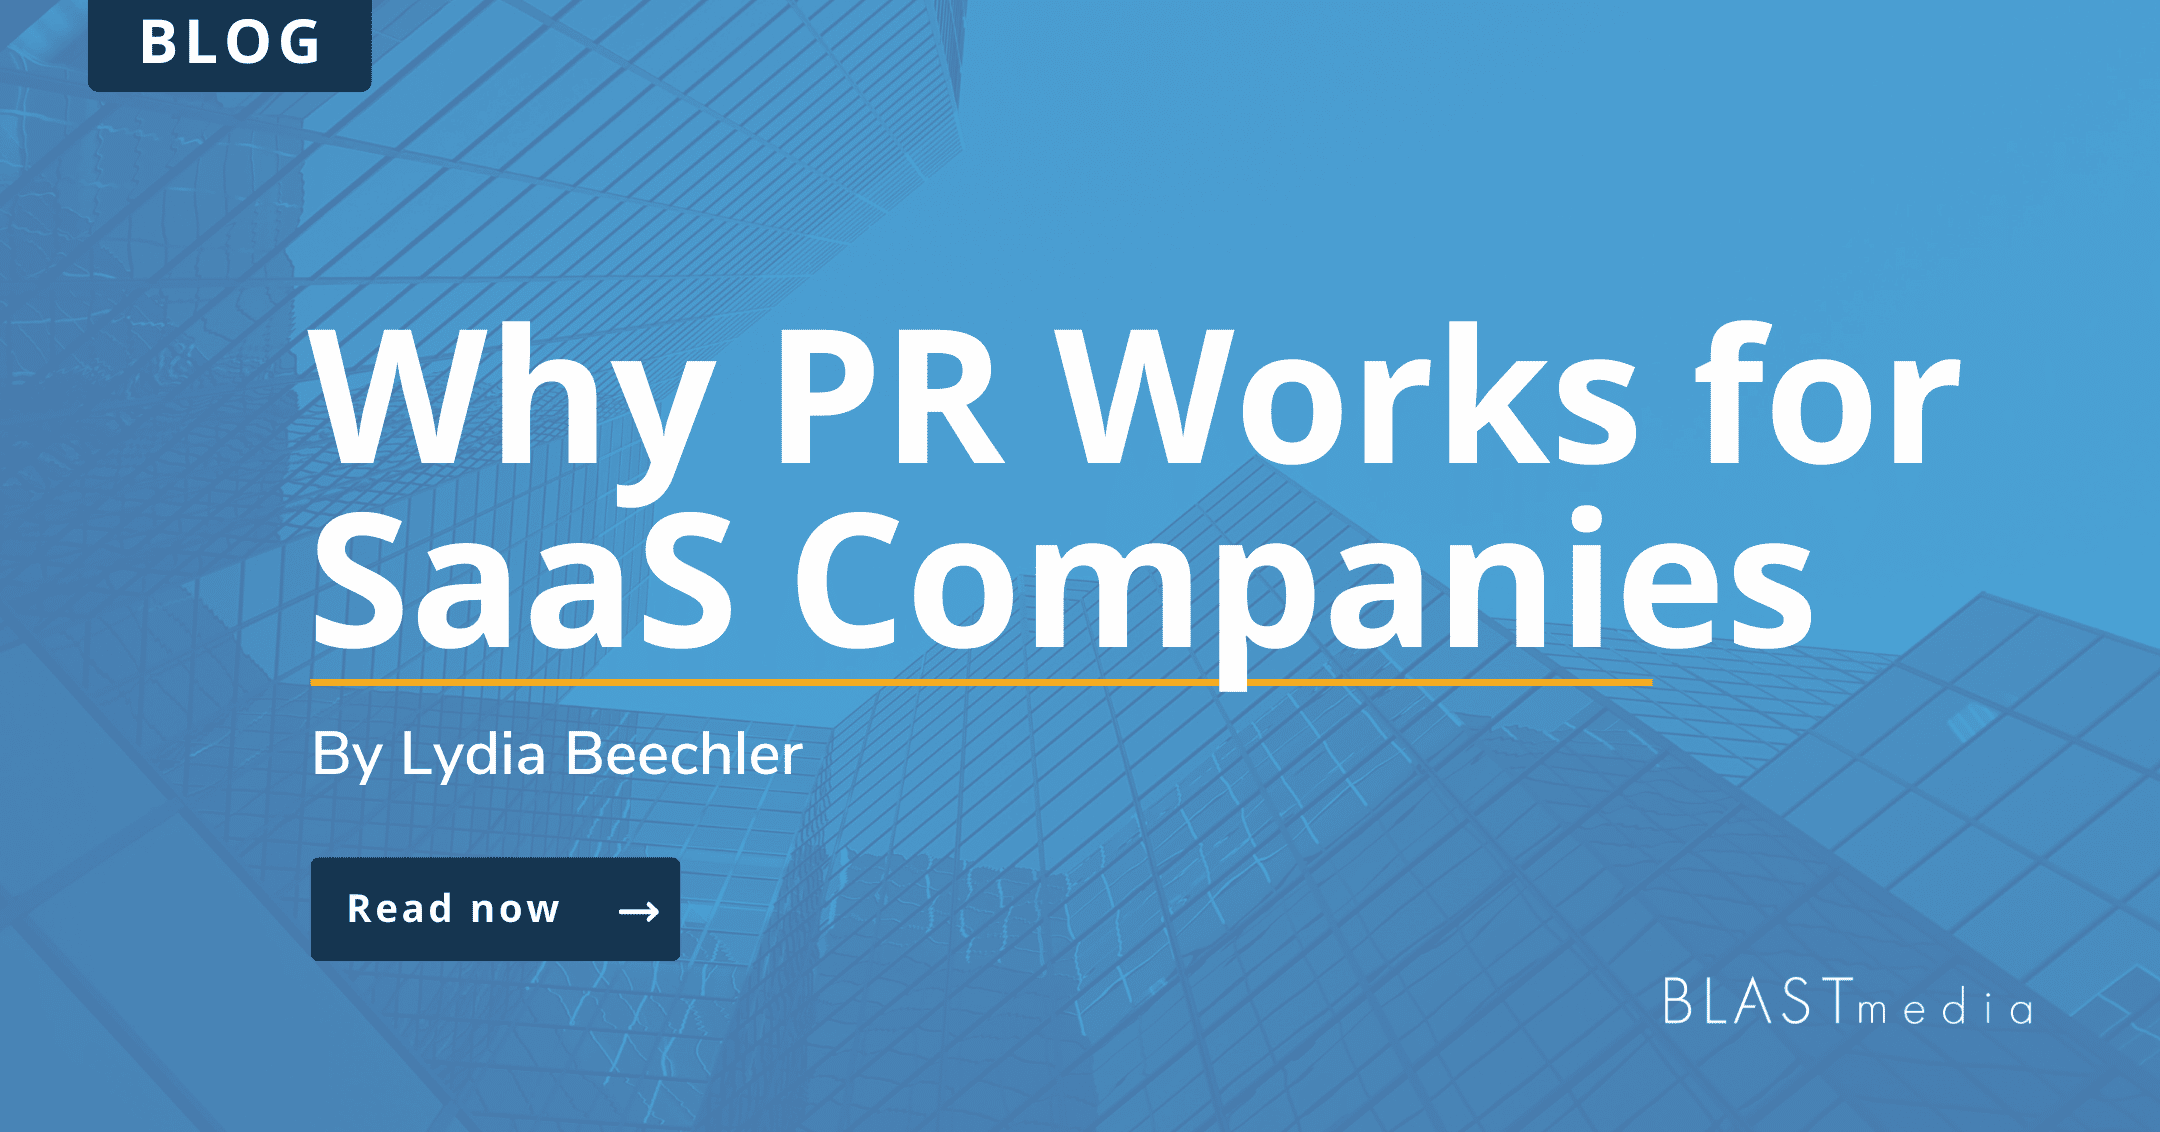 Why PR Works for SaaS